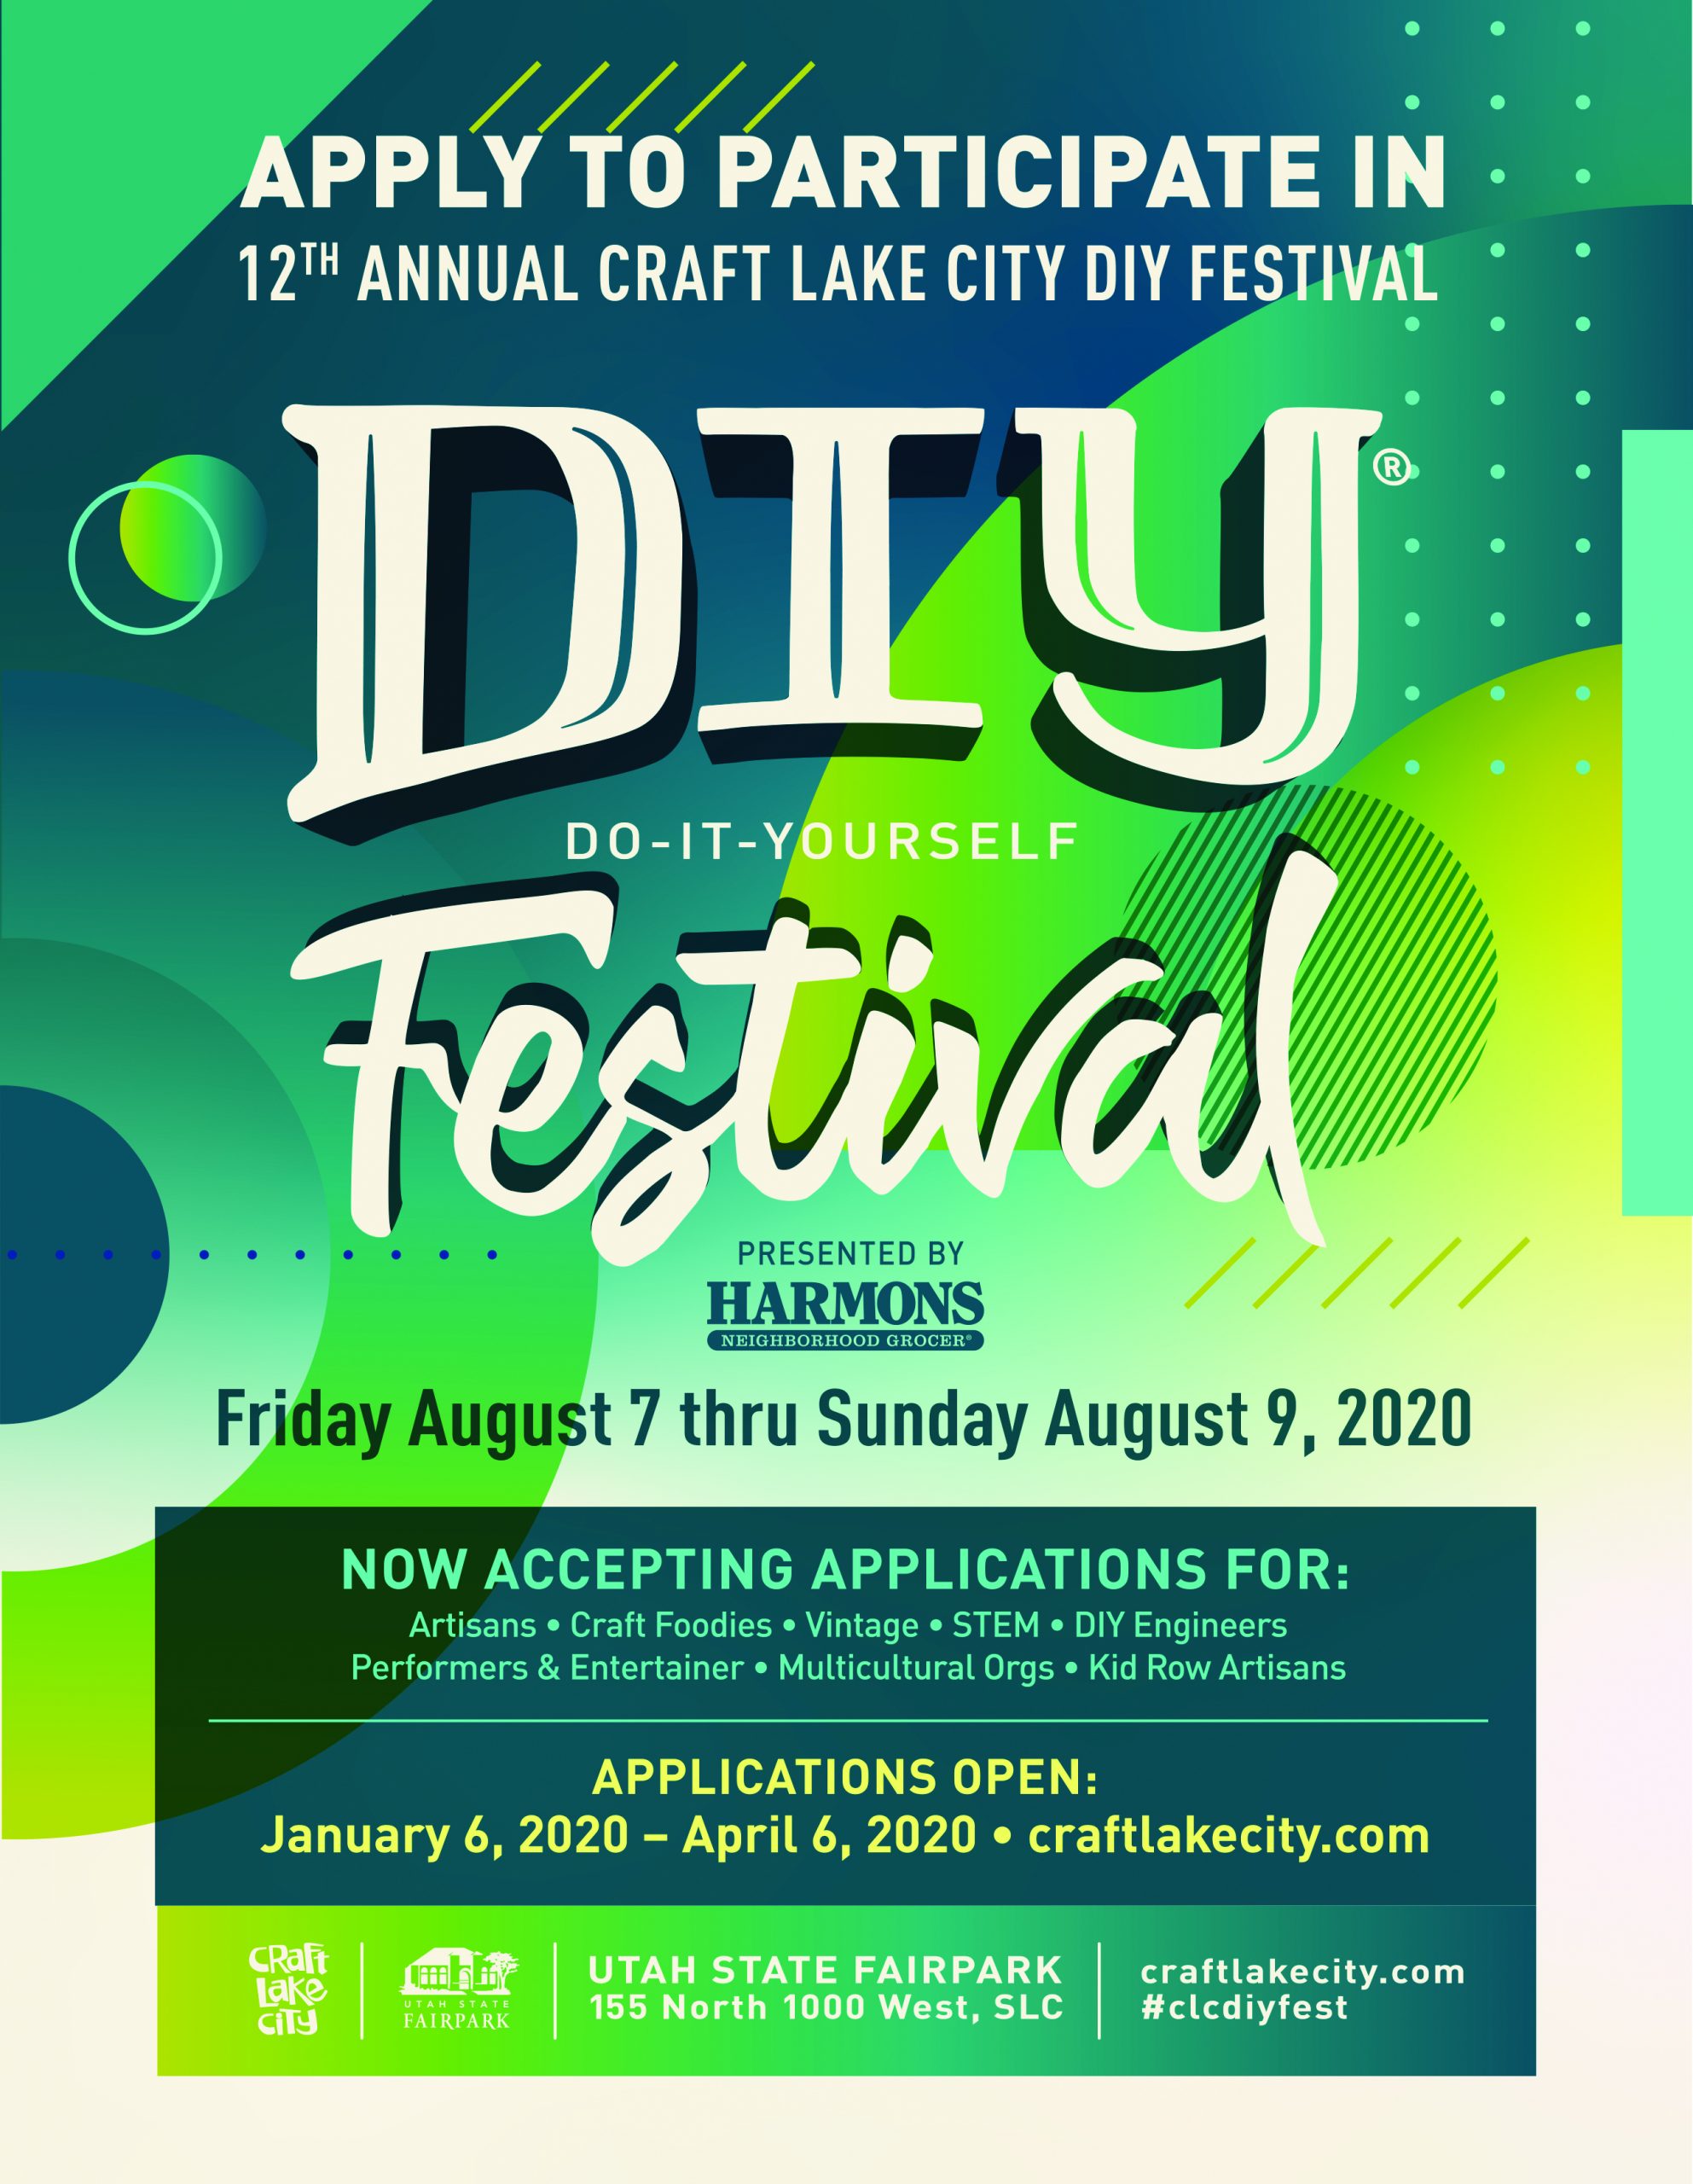 Applications Now Open for the 12th Annual Craft Lake City DIY Festival